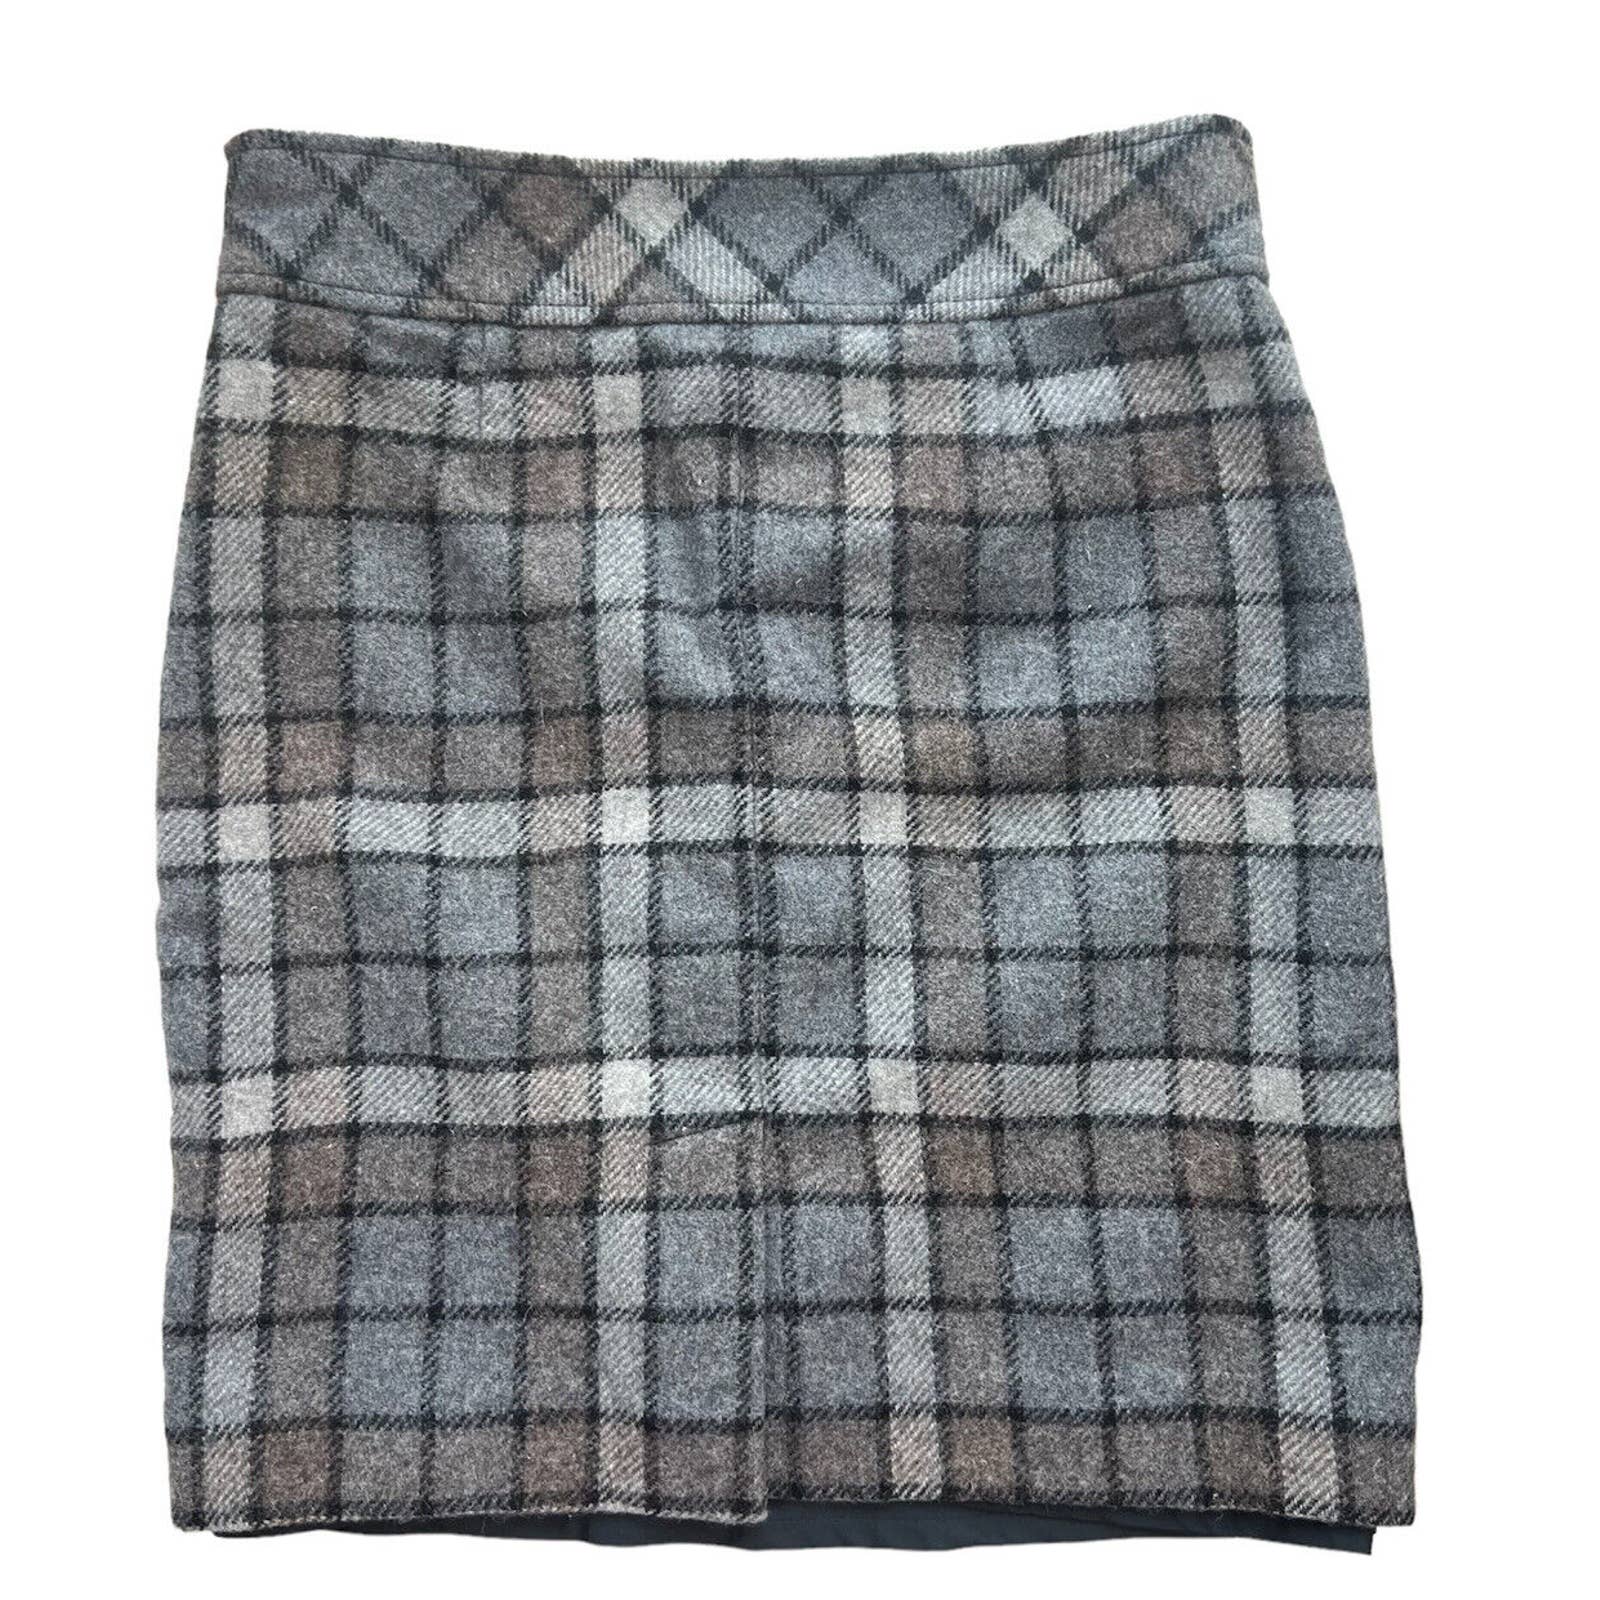 L.L. Bean Skirt Women’s Size 6 Petite Wool Blend Lined Gray And Brown Plaid